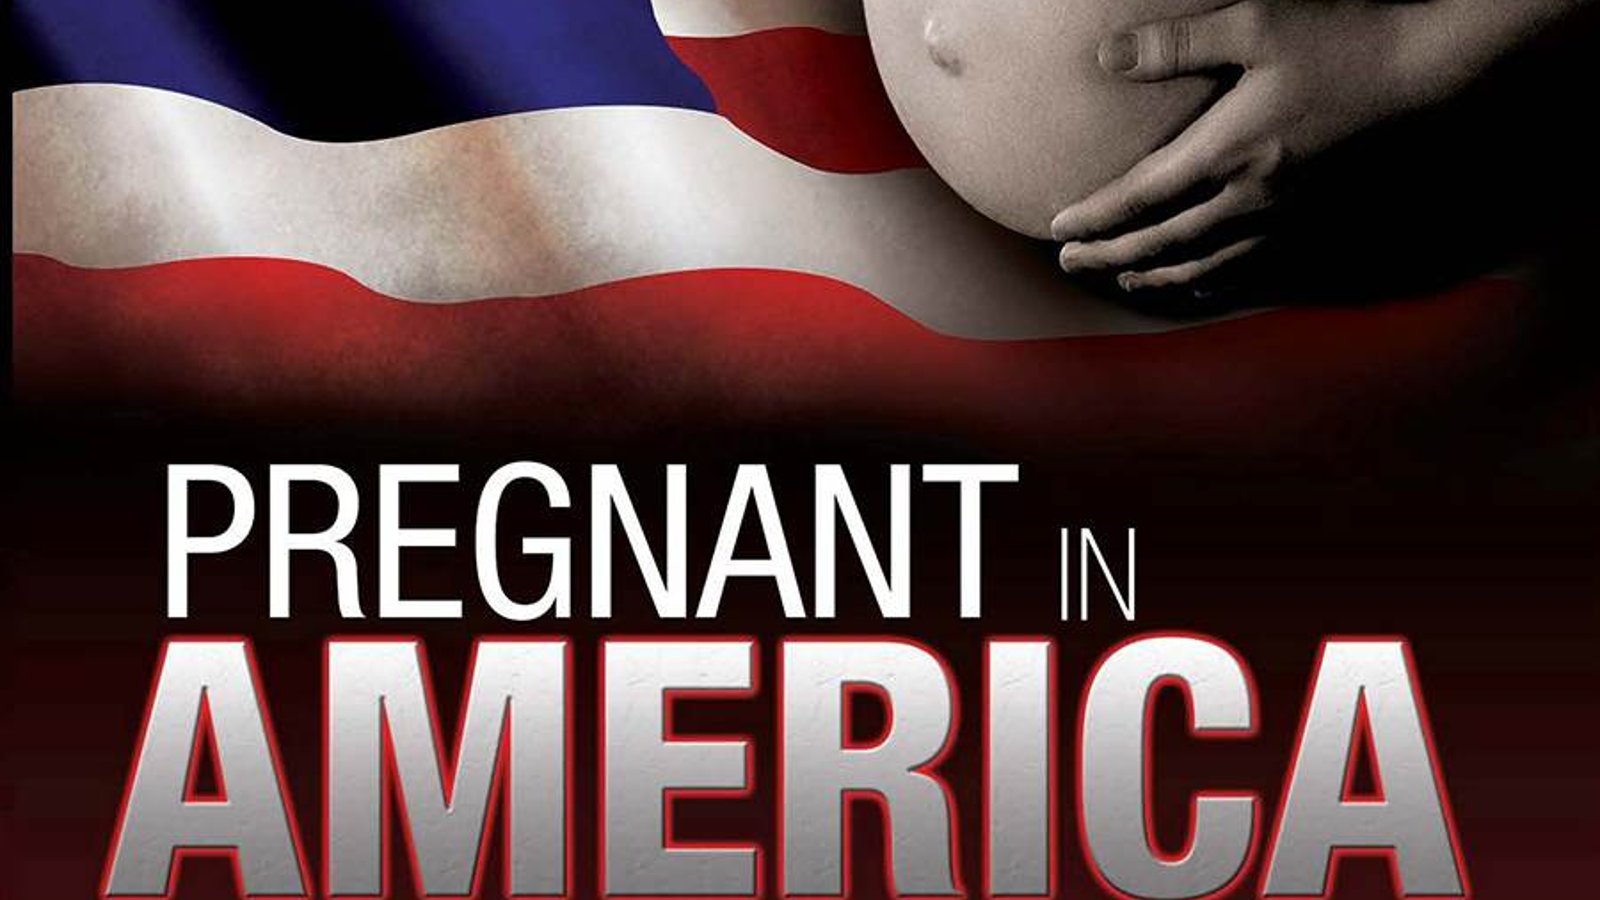 Pregnant in America - The Controversial Story of Life’s Greatest Miracle